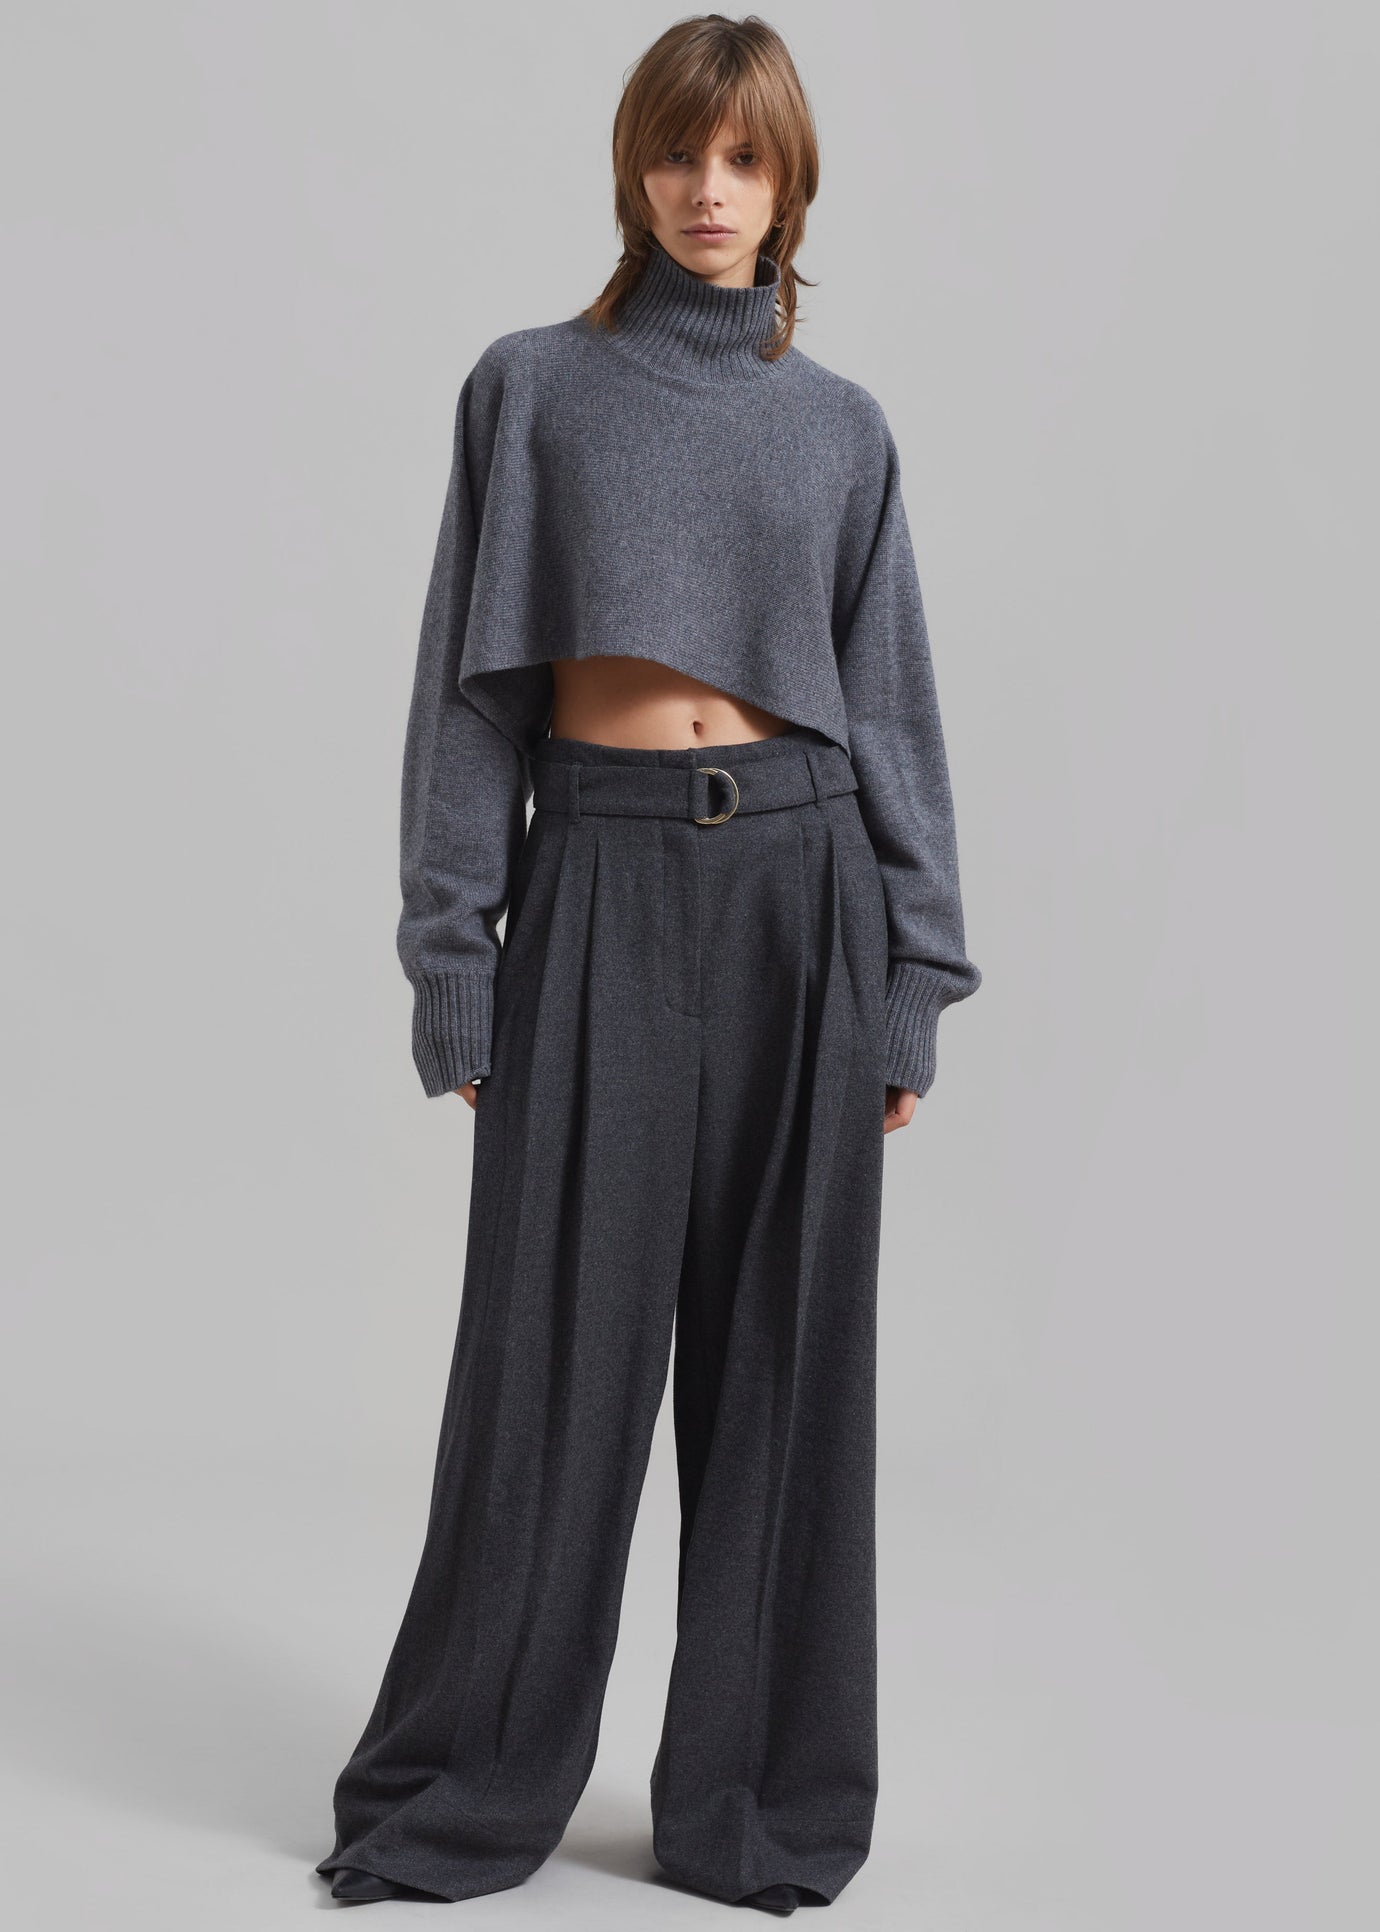 3.1 Phillip Lim Flannel Oversized Pleated Belted Pants - Charcoal